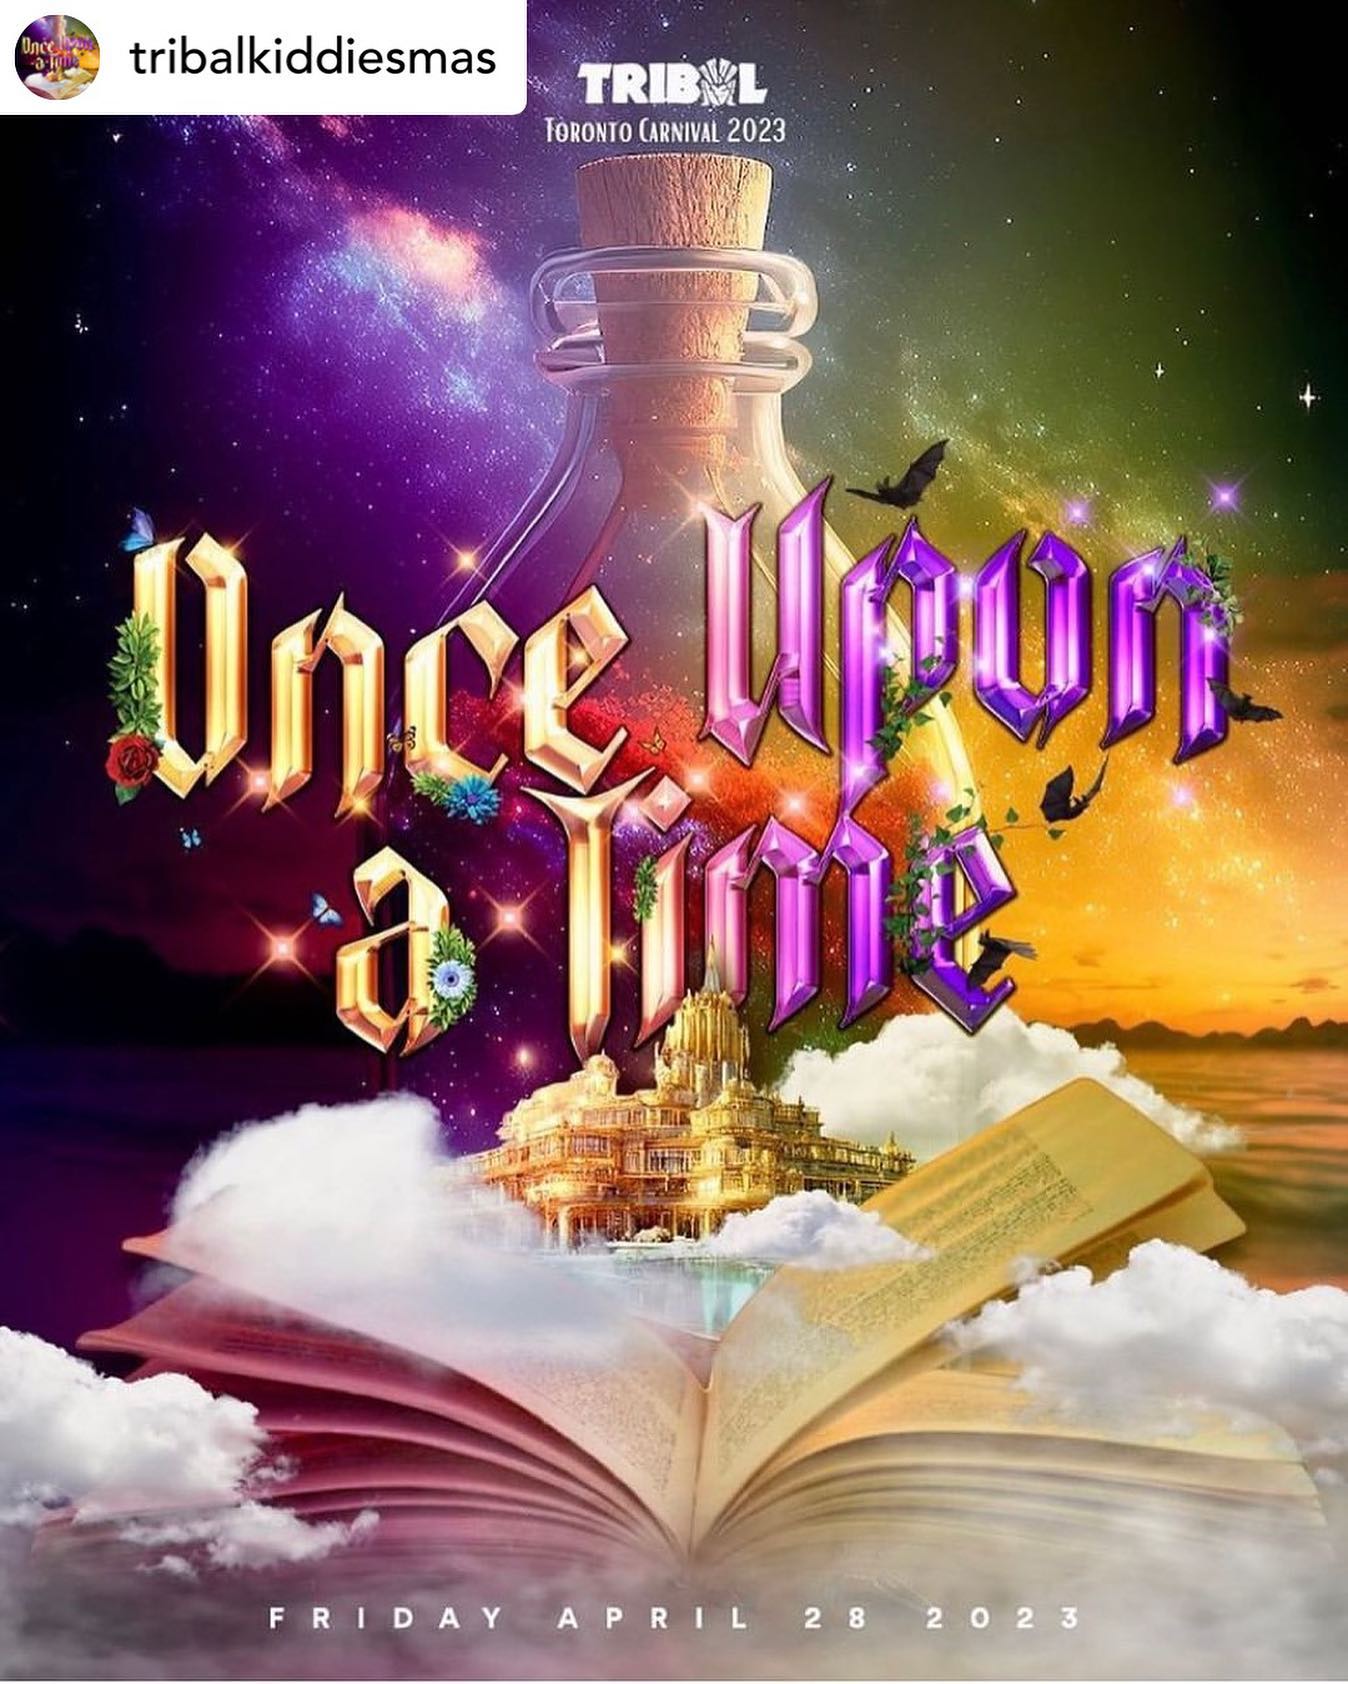 🧚🏽‍♂️ONCE UPON A TIME 🧚🏾
. Launching Friday, April 28th 2023.
.
OVER THE YEARS — we’ve been able to capture the imaginary that is known and unknown from every tribe and time. 

Some call them stories, tales or legends but no matter what they are called they all begin with — ONCE UPON A TIME 🧚🏽‍♂️

—————————————-
GET YOUR TICKETS NOW!!!
—————————————-

@tribalcarnival 
@ceeforcarnival